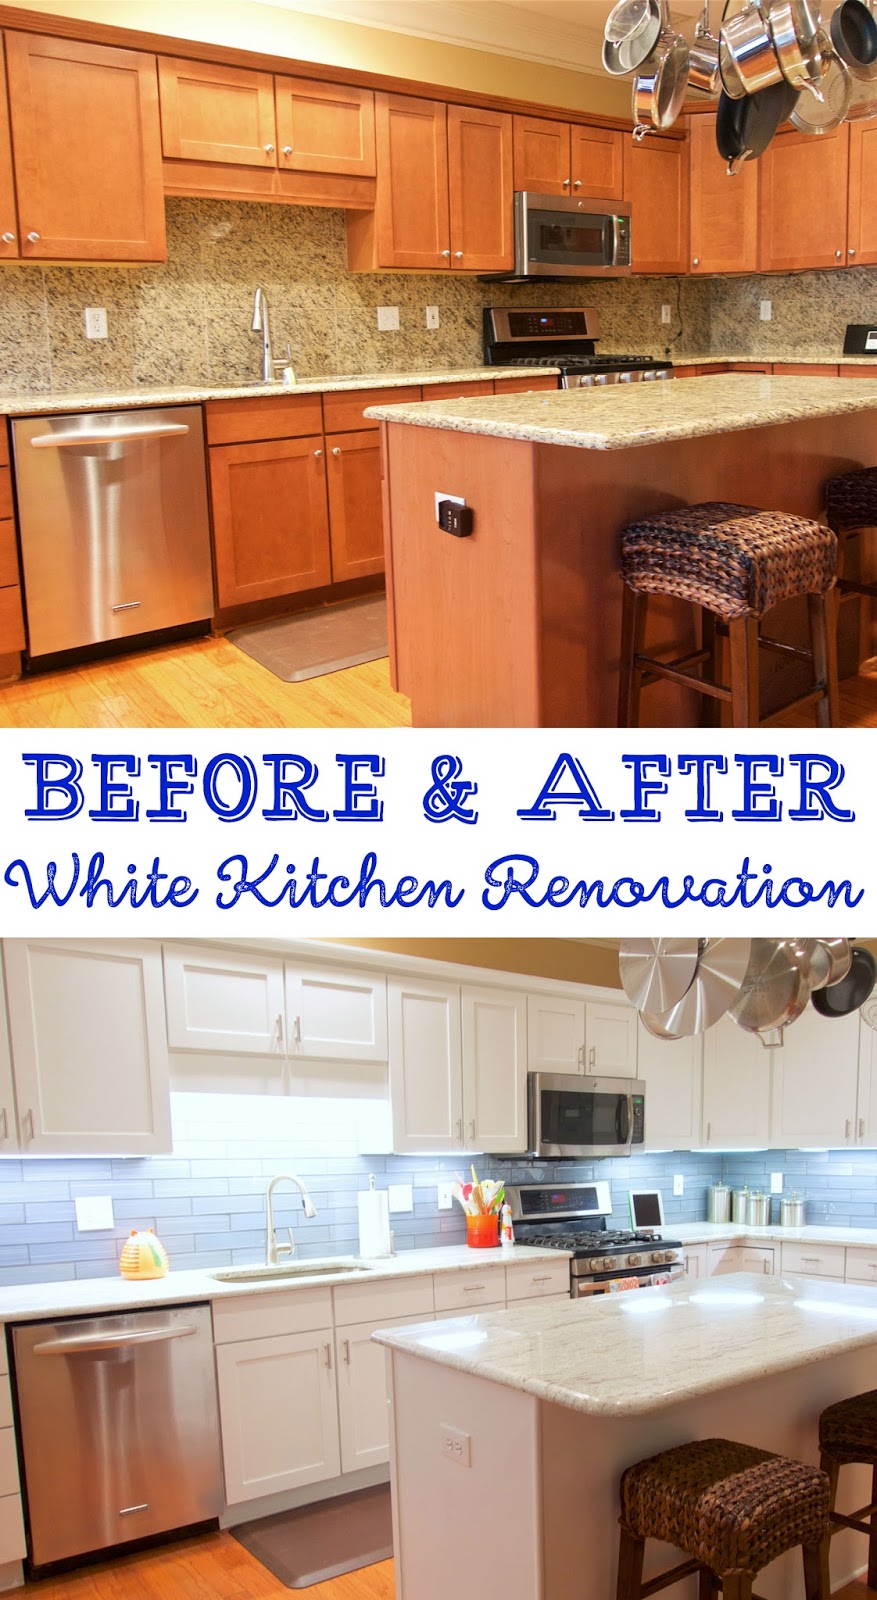 Before and After White Kitchen Renovation - Plain Chicken